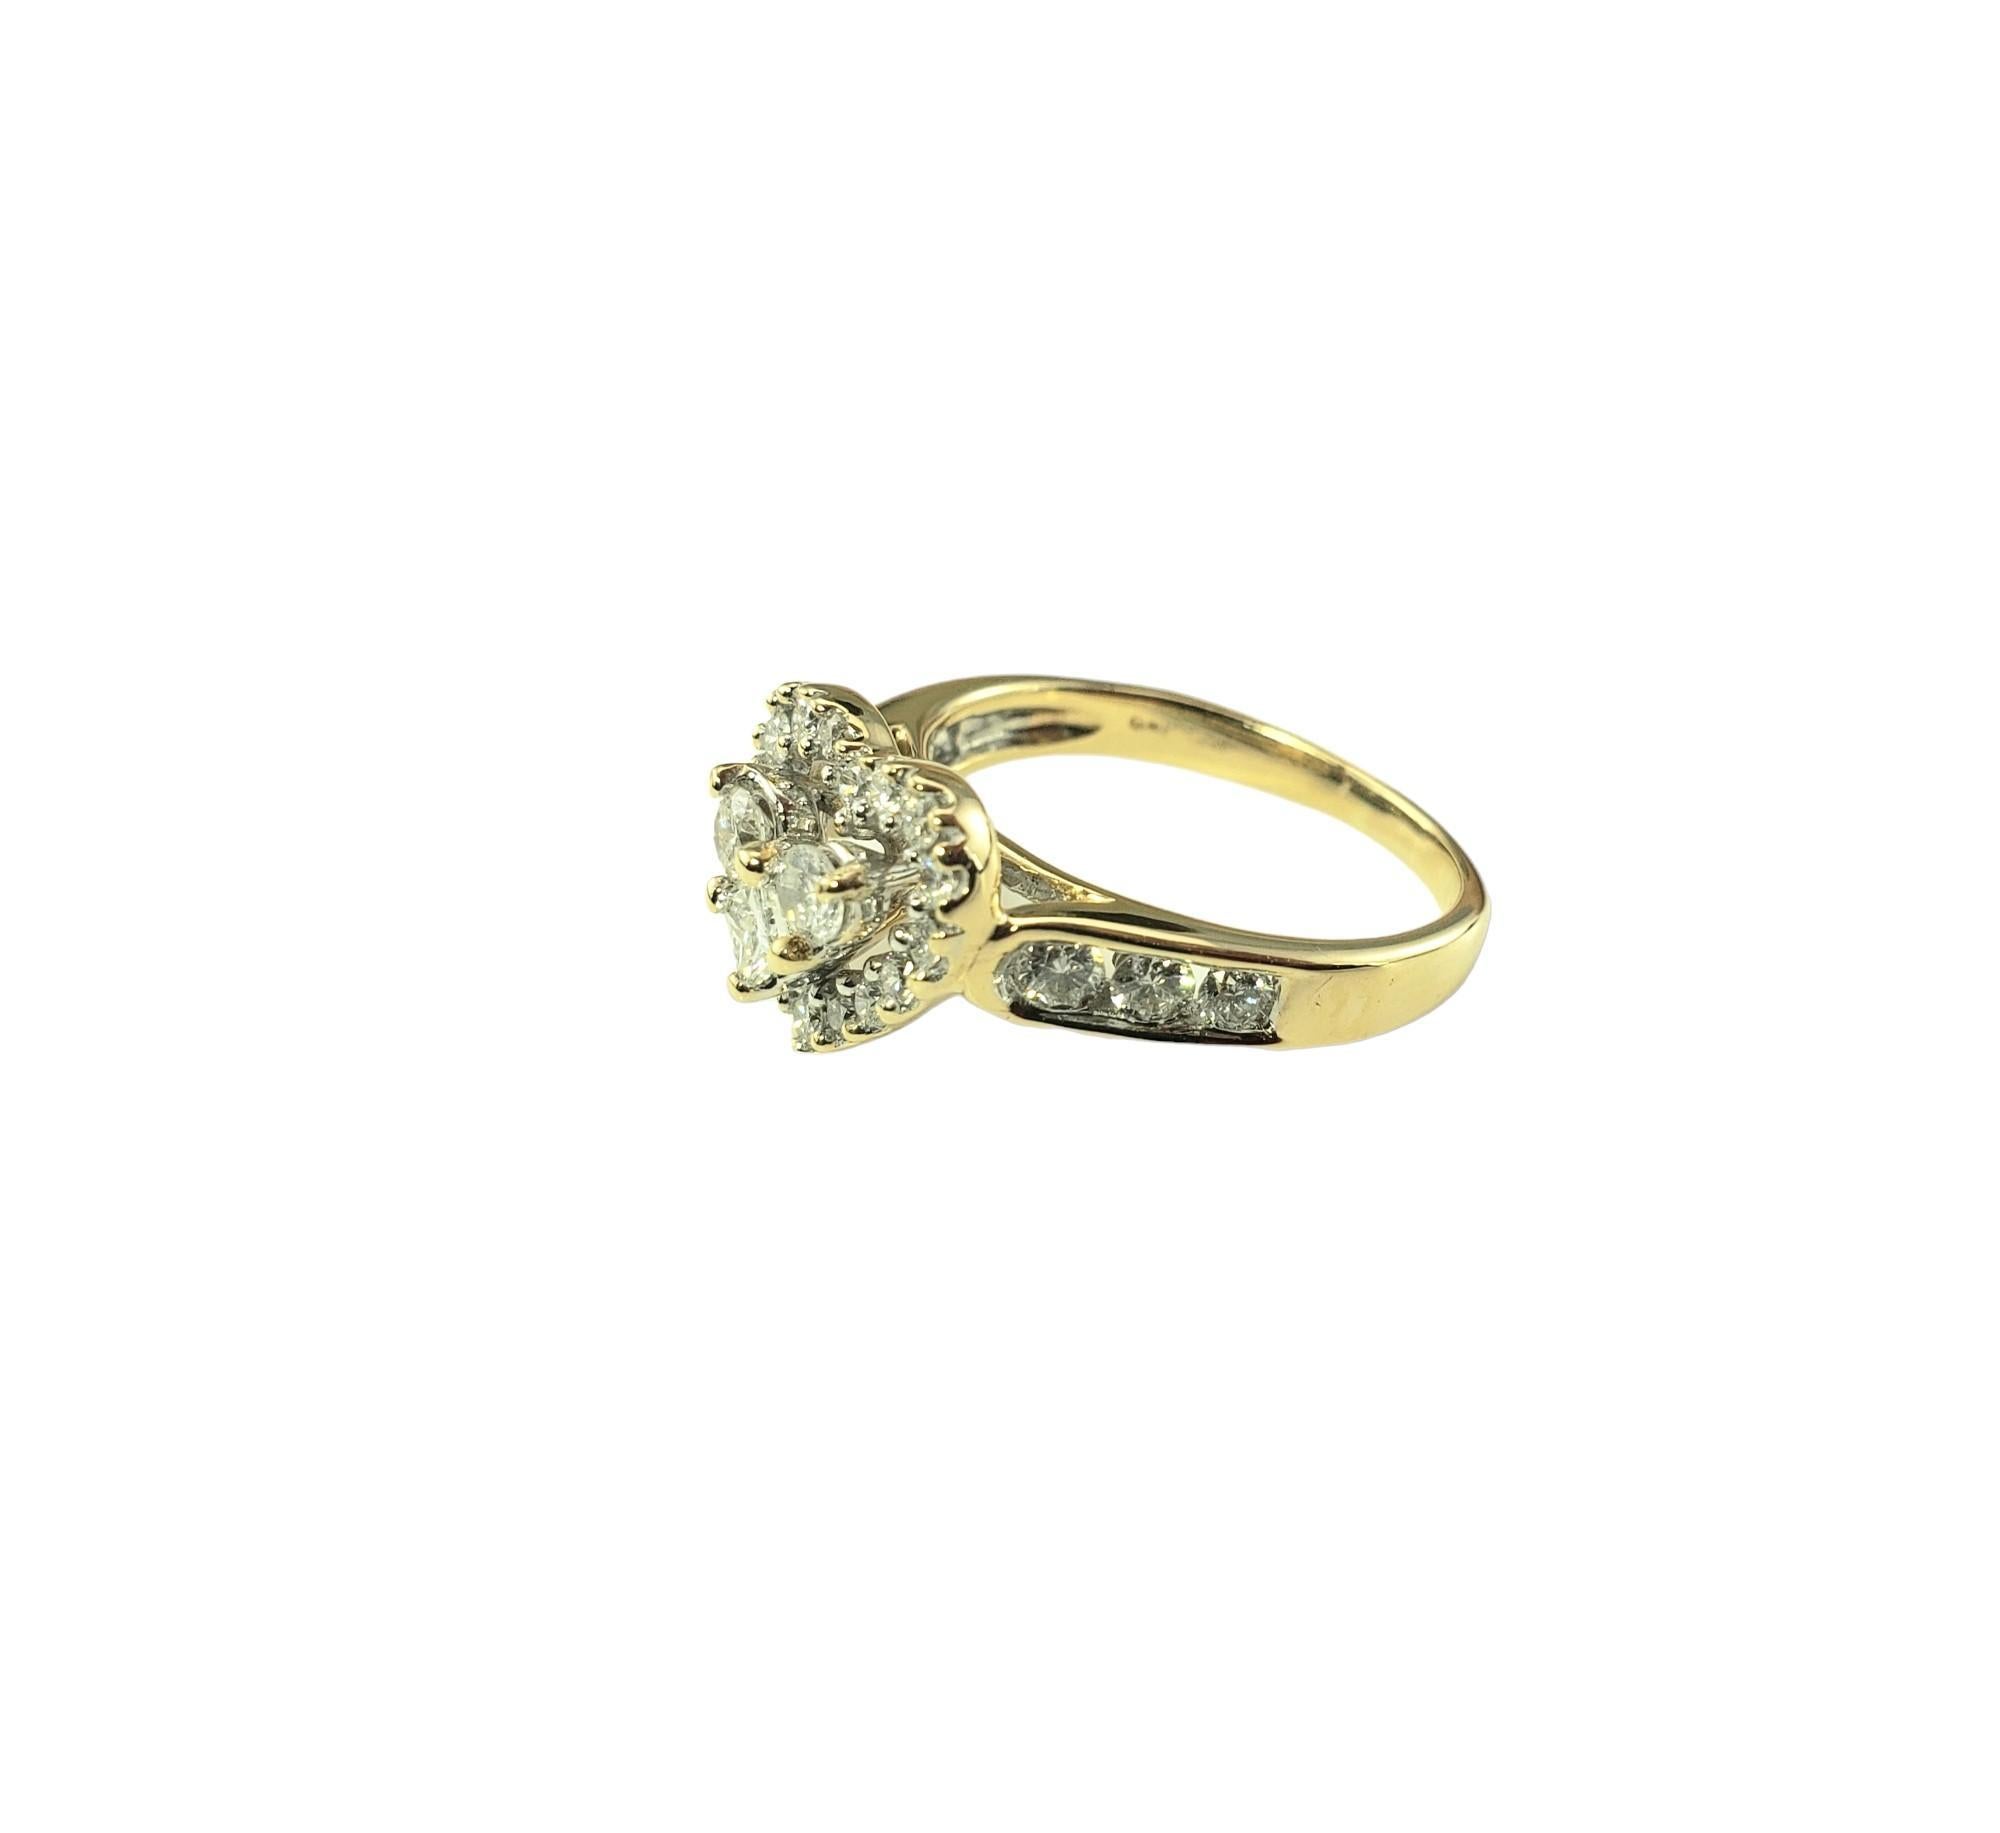 14 Karat Yellow Gold Diamond Heart Ring Size 6.25-

This stunning heart ring features 24 round brilliant cut diamonds and one princess cut diamond set in beautifully detailed 14K yellow gold.  Width: 10 mm.  
Shank:  2 mm.

Approximate total diamond